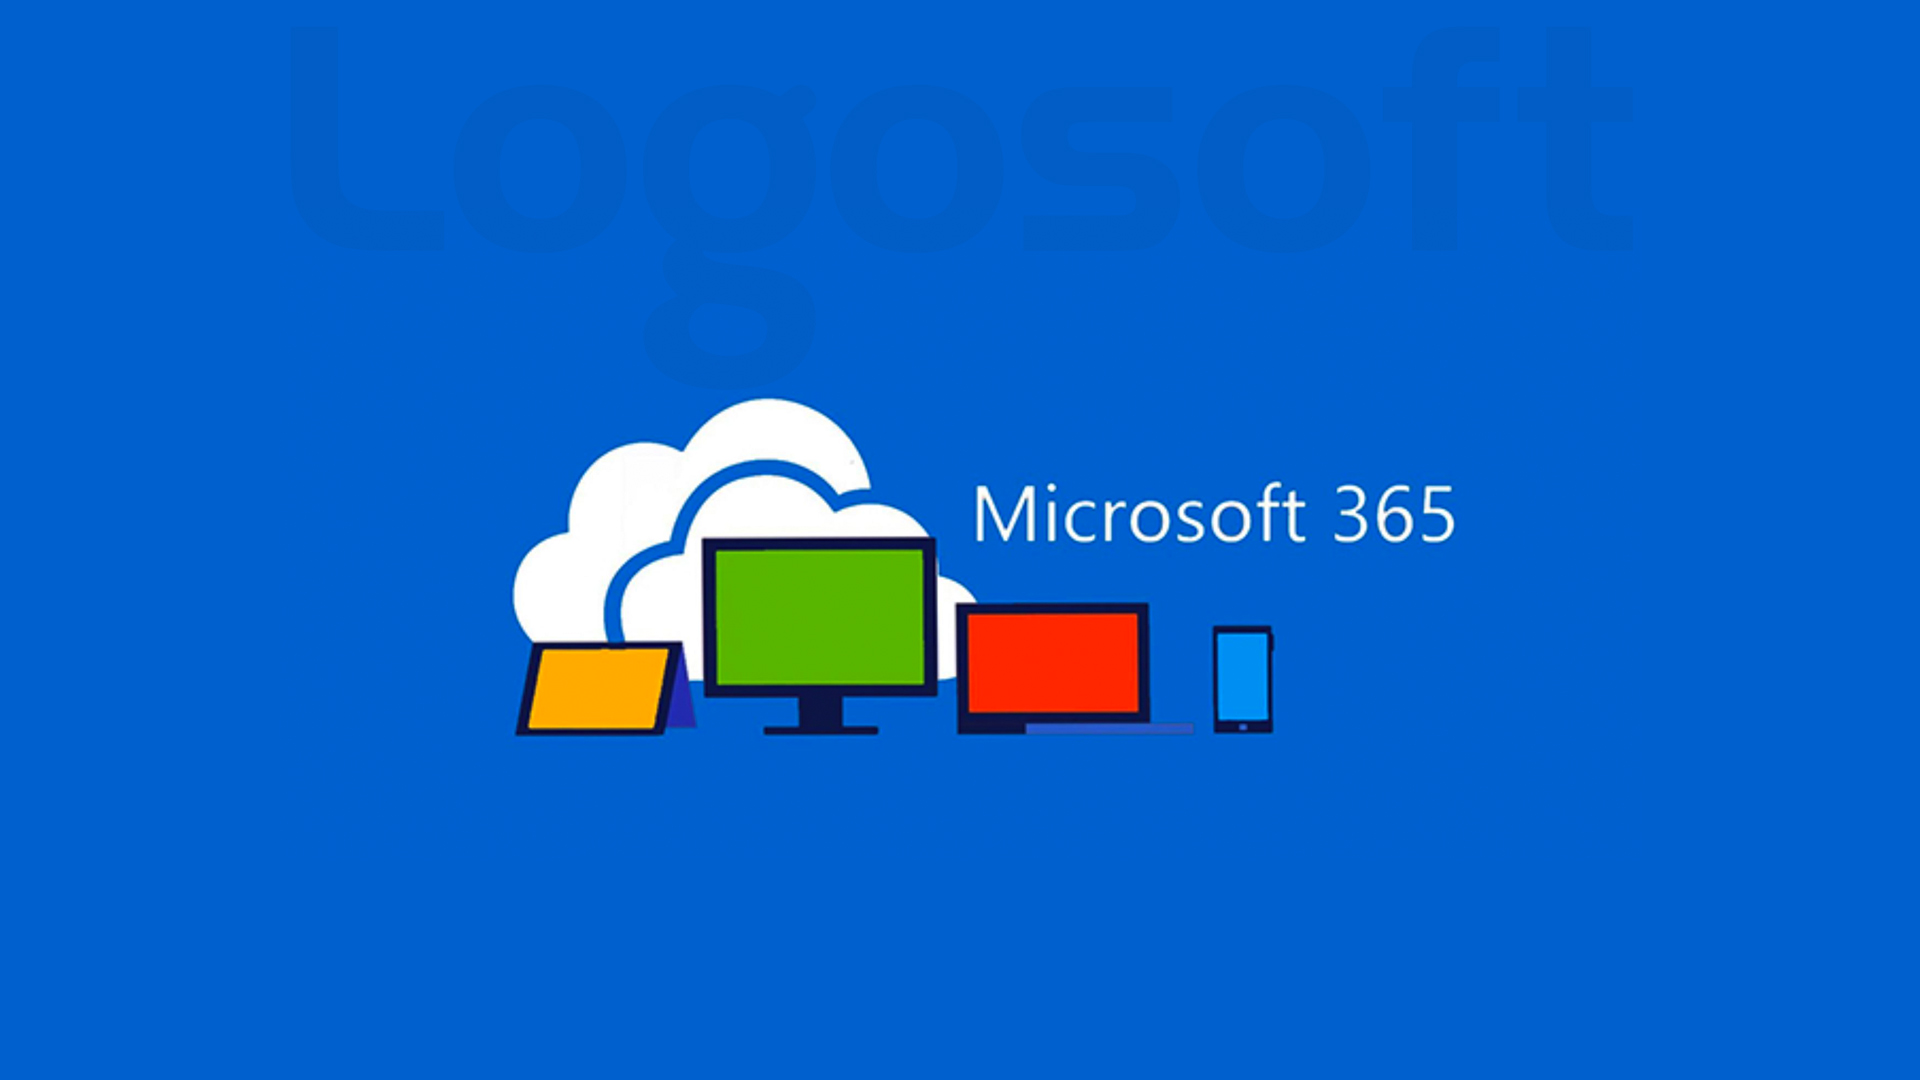 7 Benefits Microsoft 365 Offers for Companies